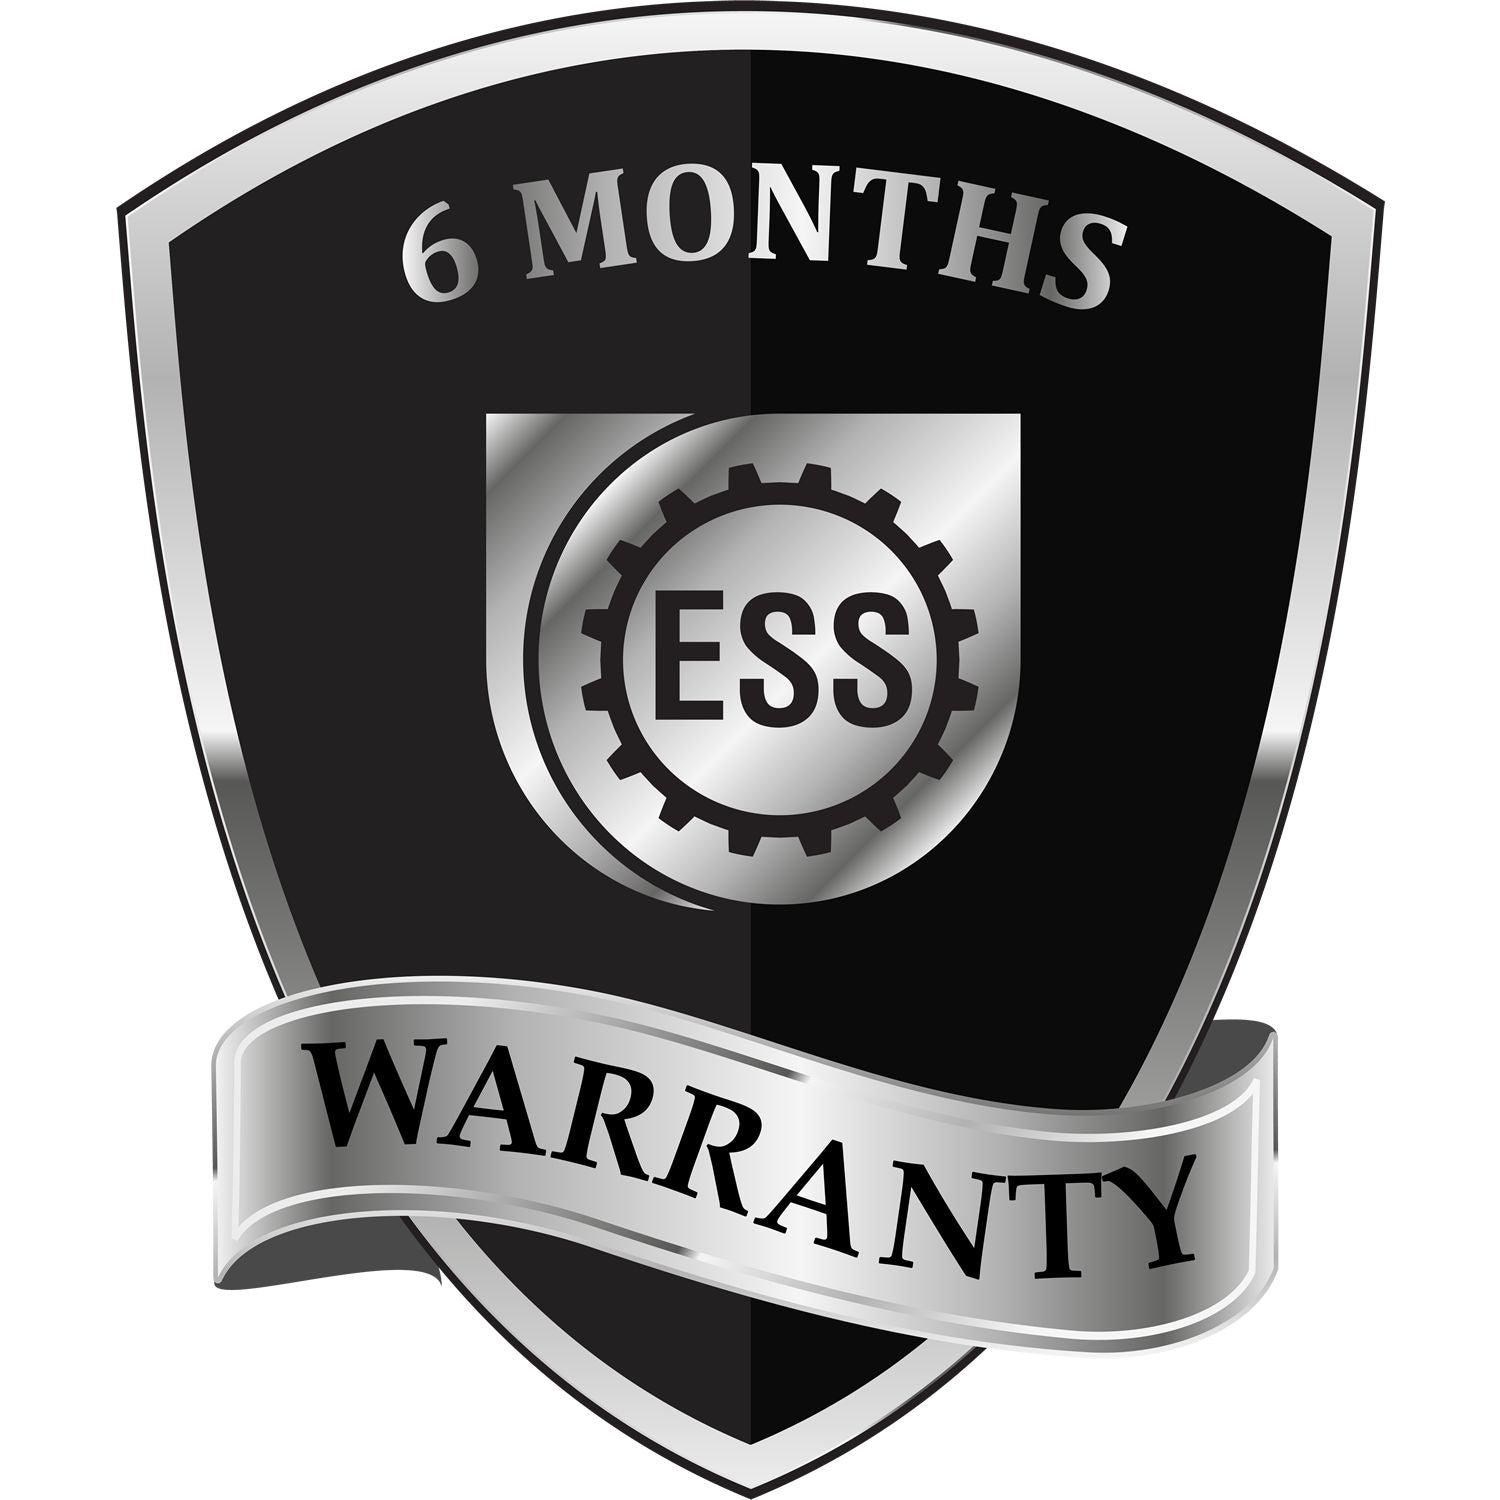 A badge or emblem showing a warranty icon for the Oregon Professional Engineer Seal Stamp